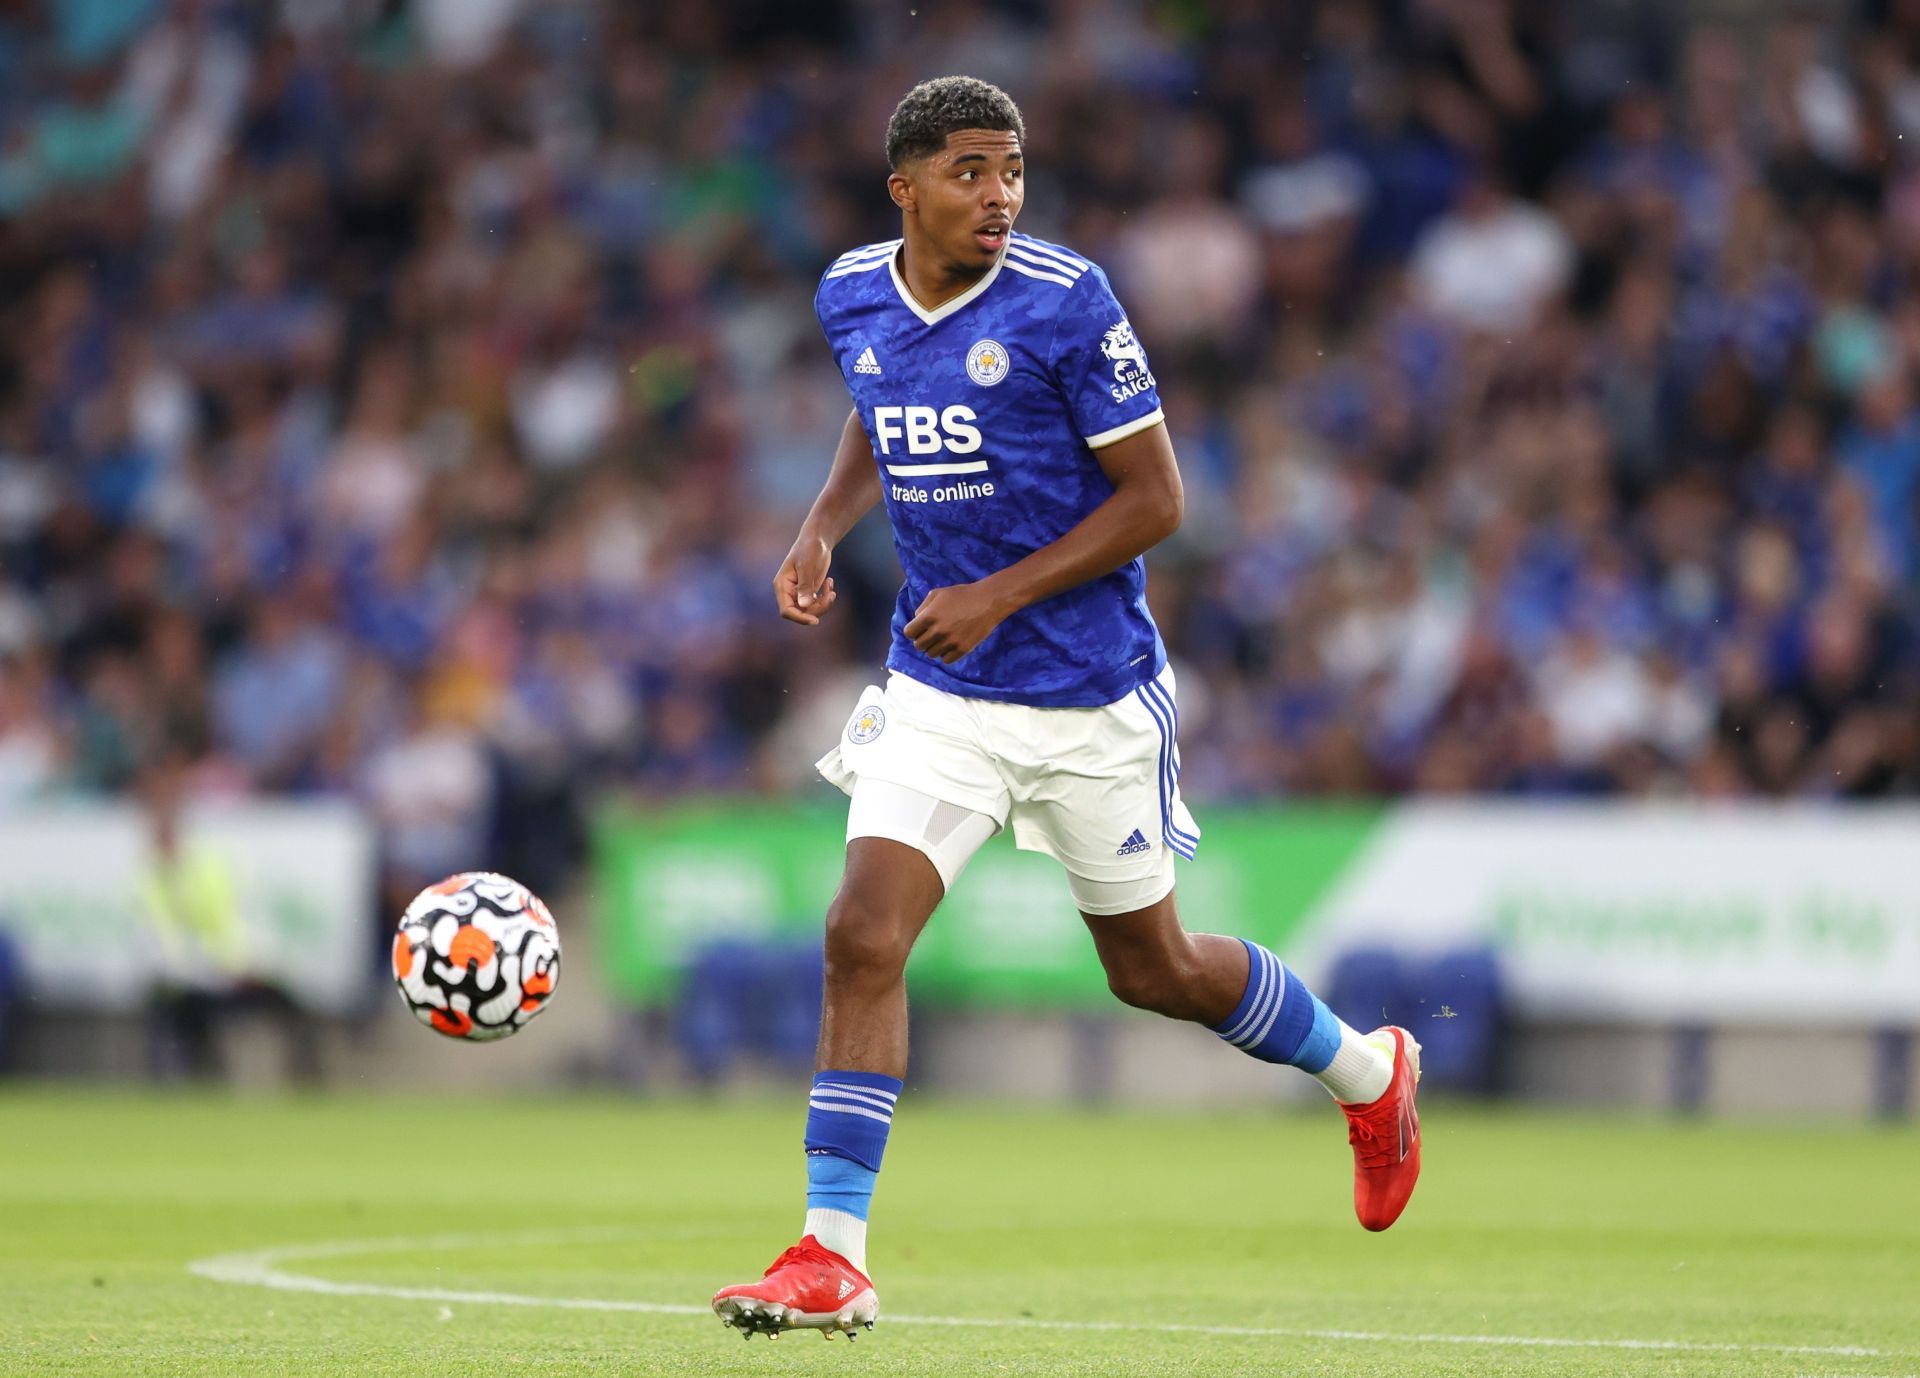 Chelsea have identified Wesley Fofana as the ideal replacement for Antonio Rudiger.